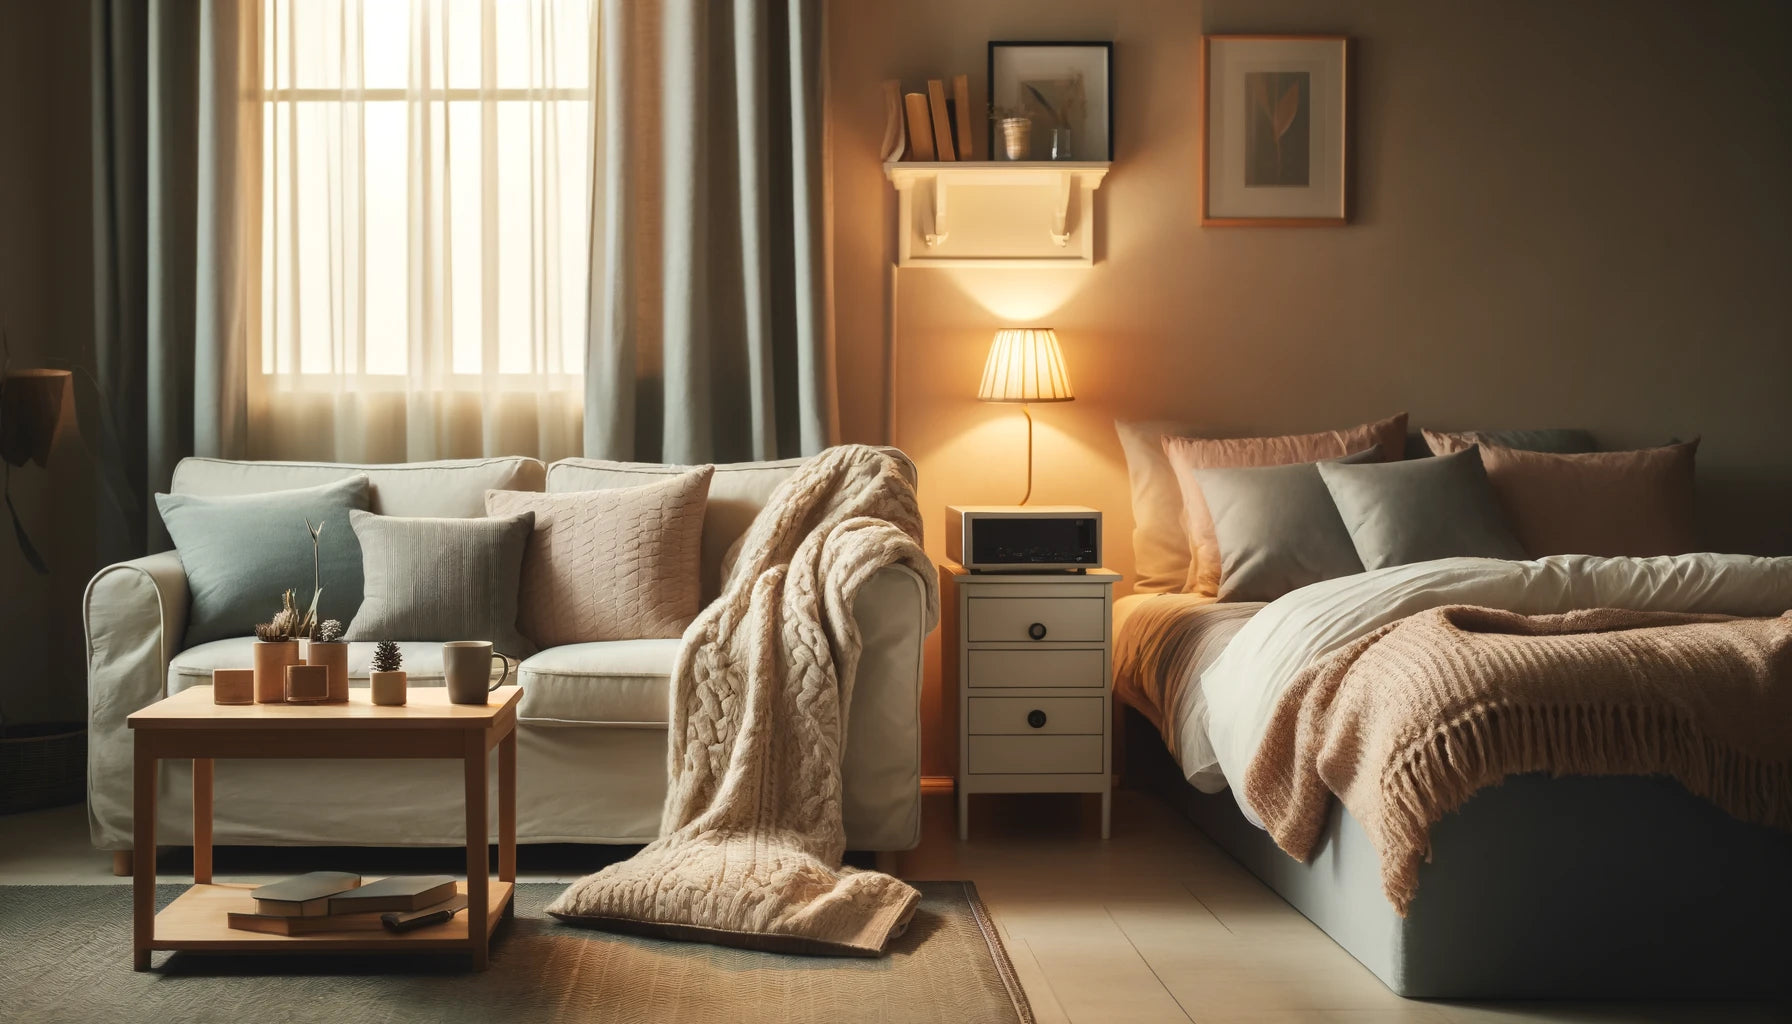 Heated Throw vs Electric Blanket: Which One is Right for You?